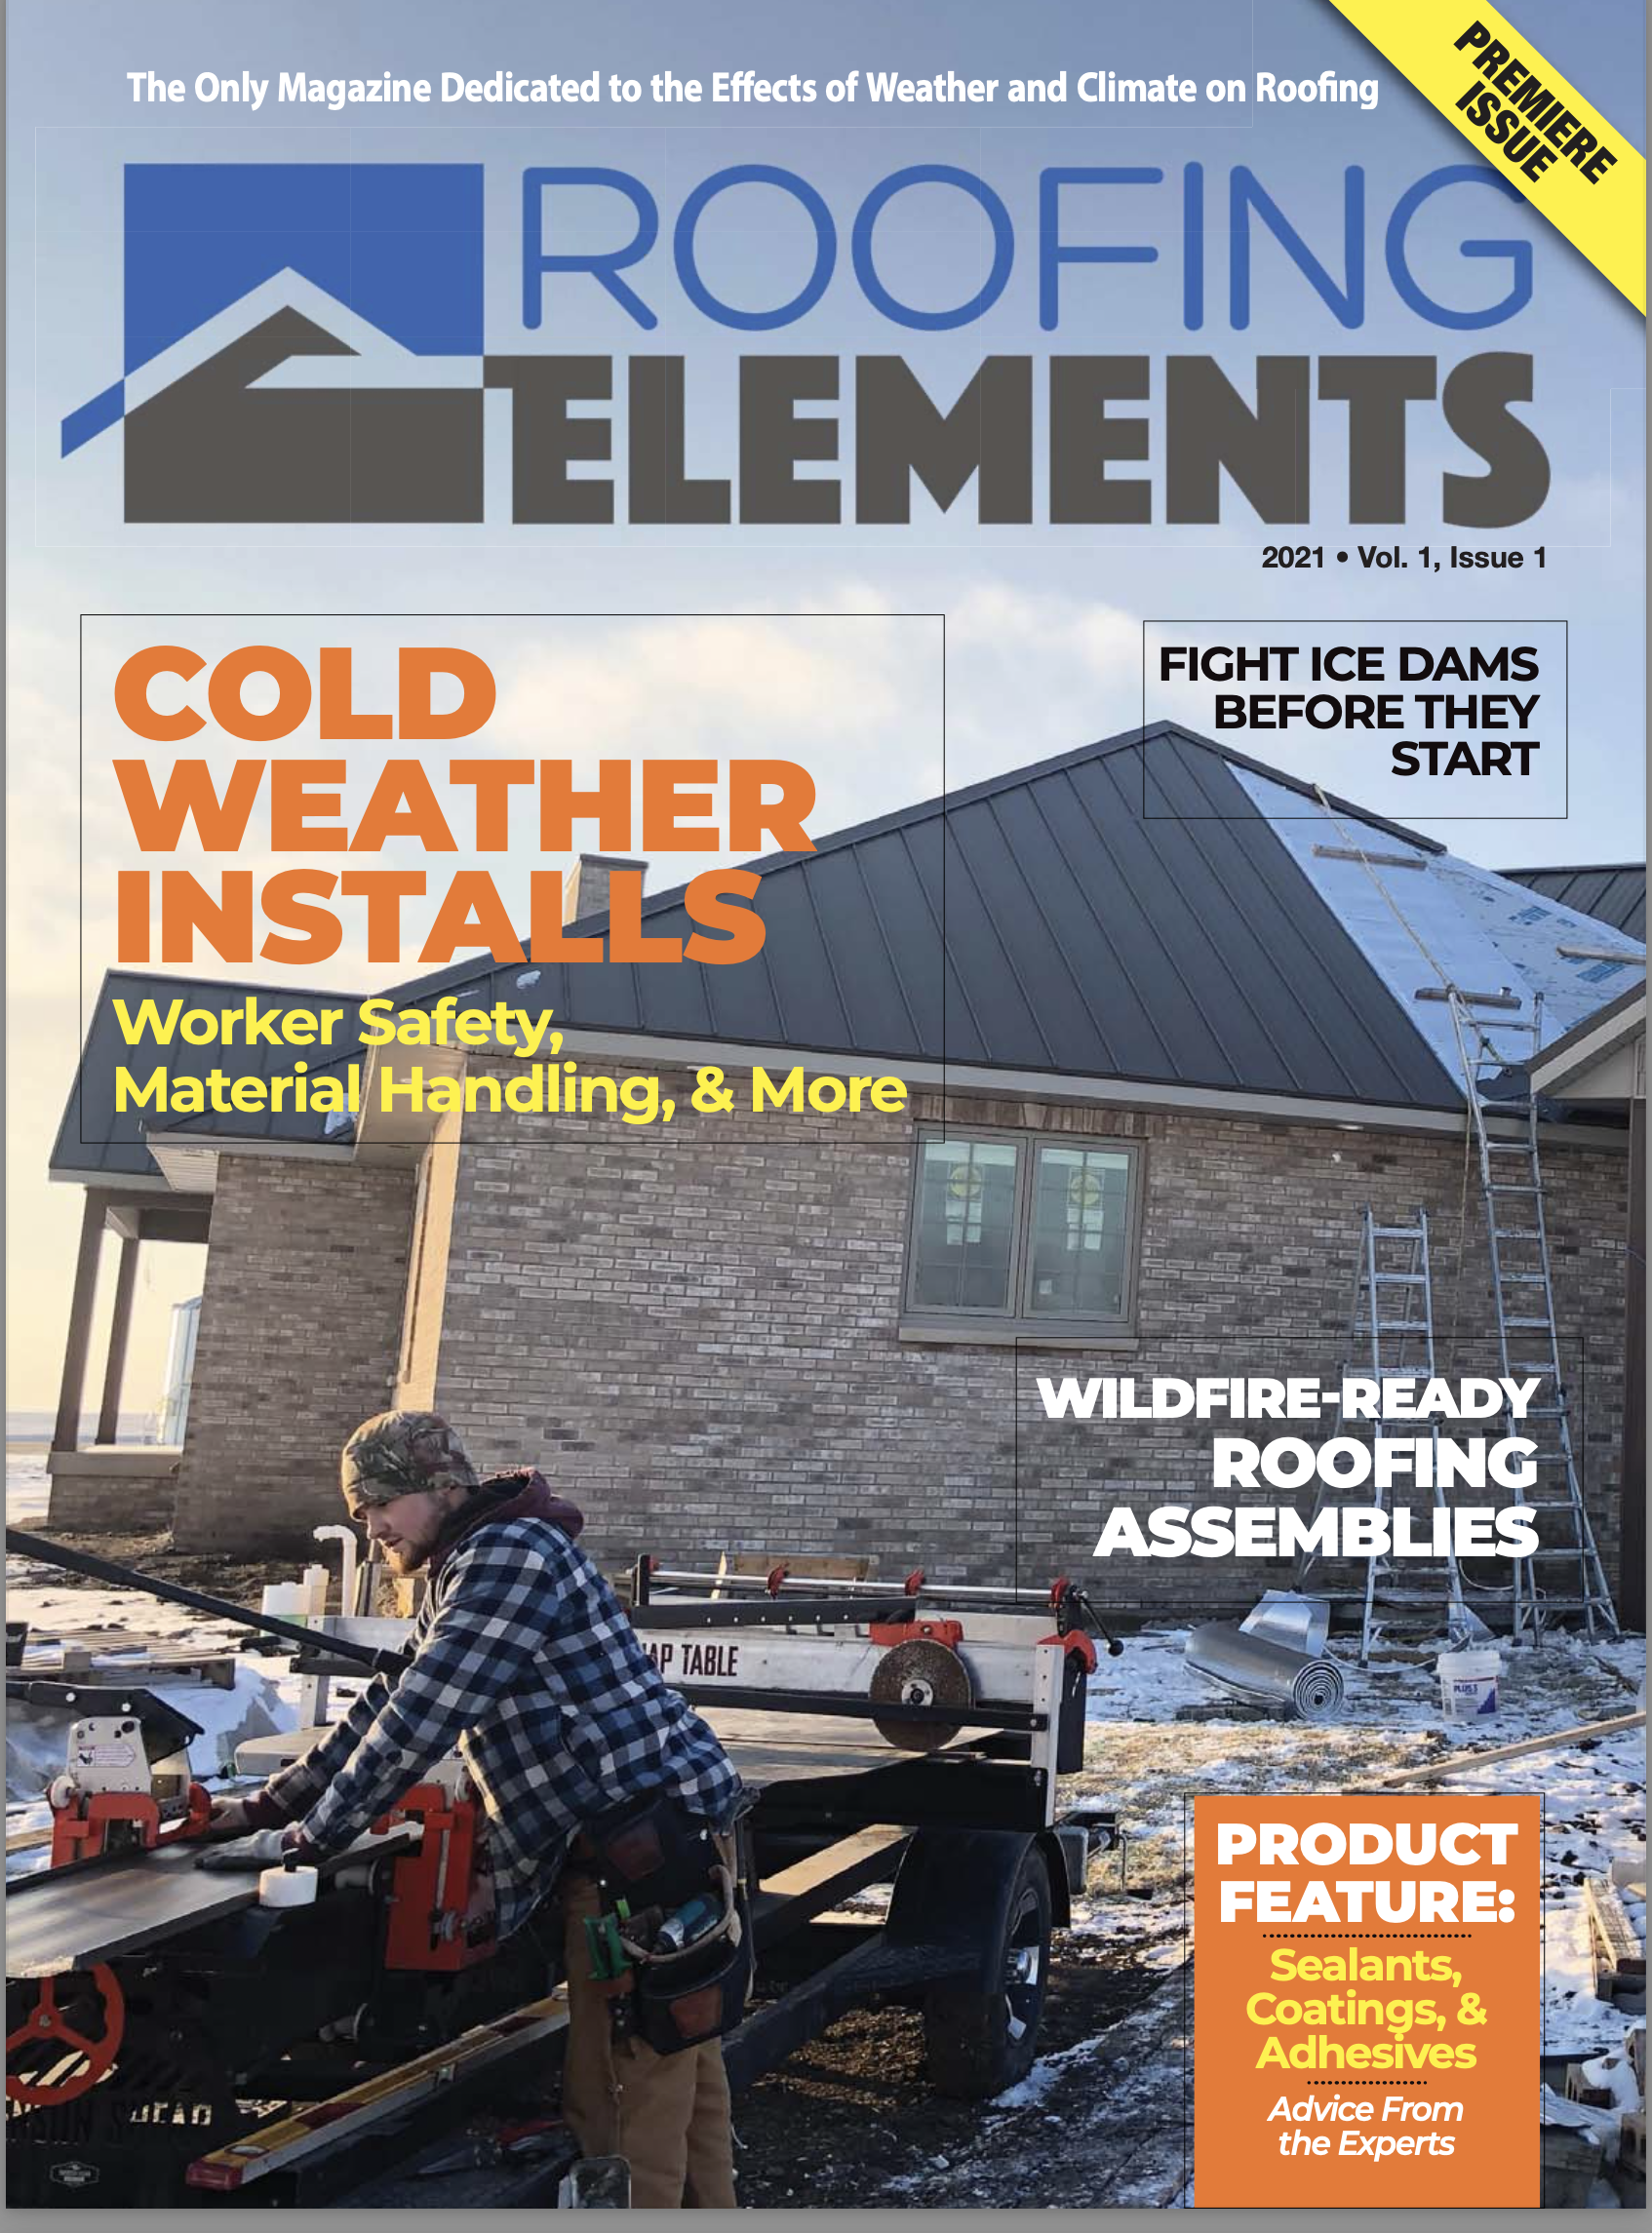 2021 Roofing Elements Premiere Issue